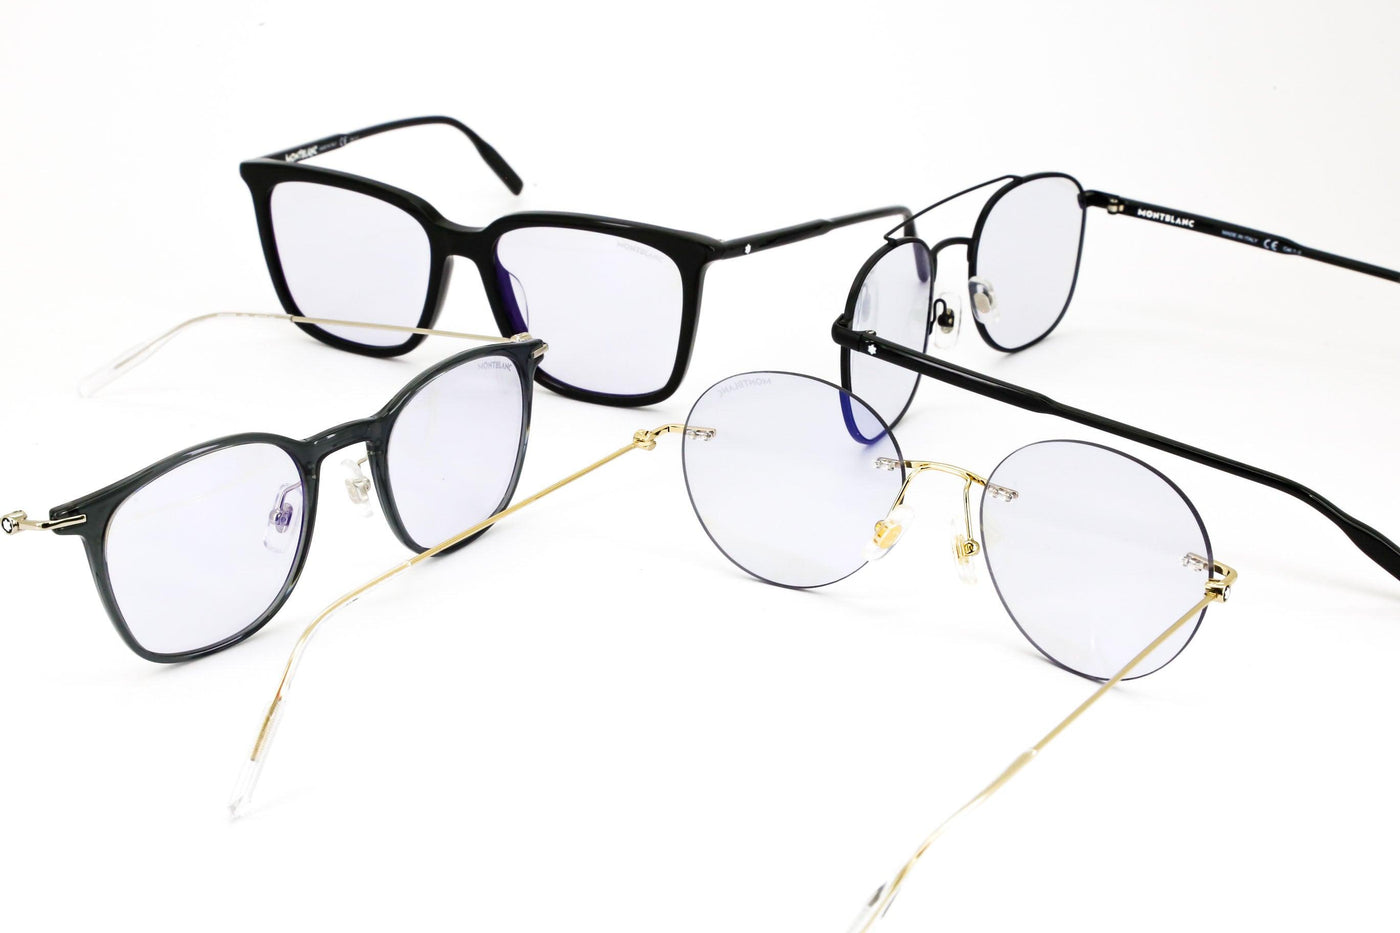 Eyeglasses Collection - Vision Express